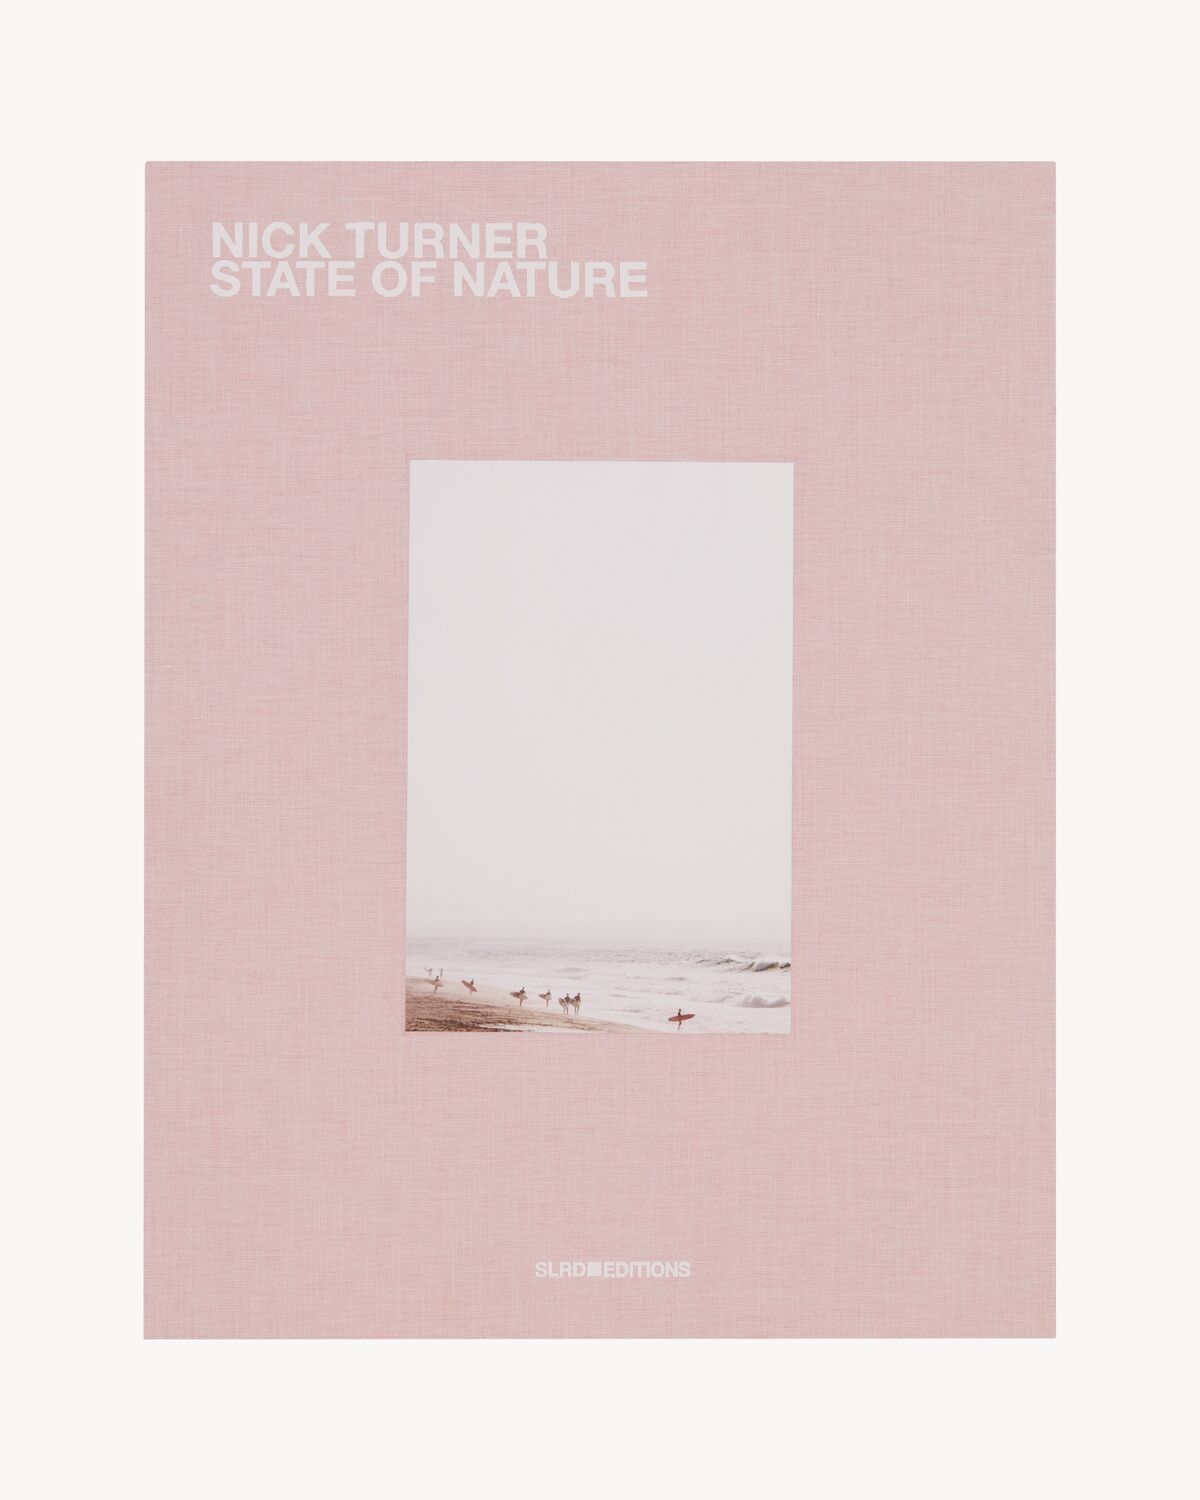 SL EDITIONS: NICK TURNER, STATE OF NATURE